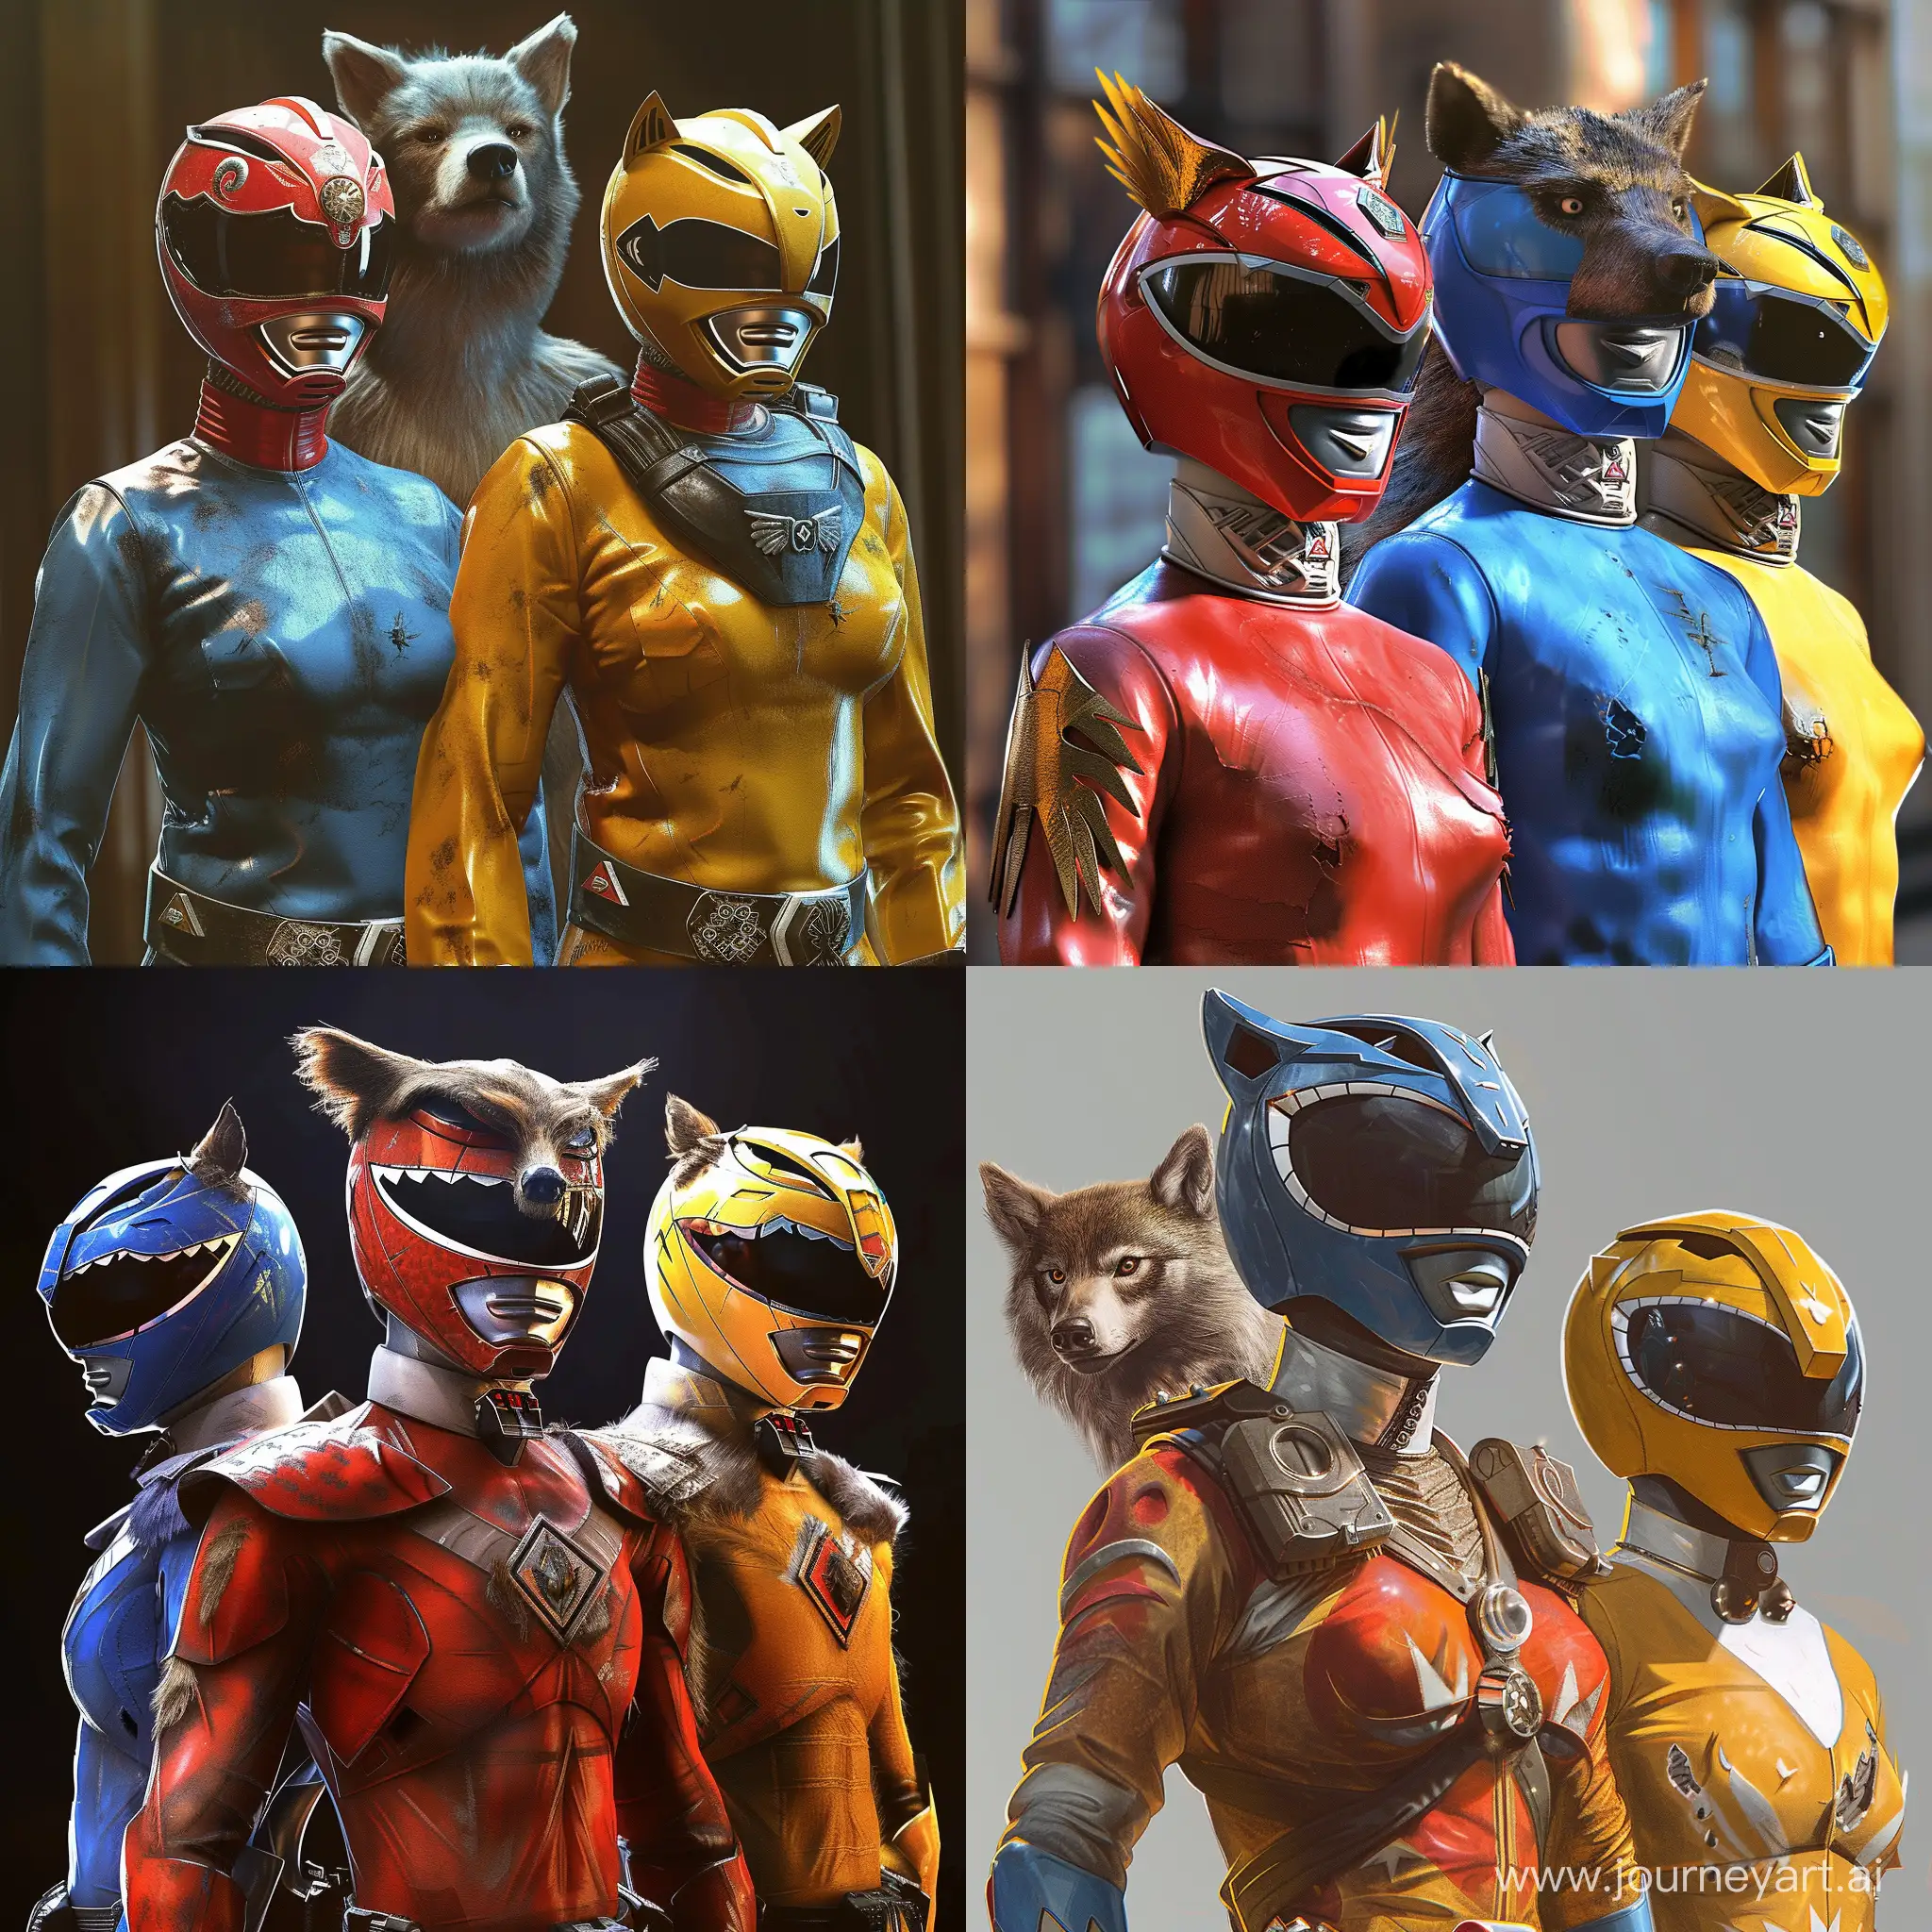 In CGI art, 3 power ranger, The Red ranger is female and has a helmet that resembles an Owl, the Blue ranger is male and has a helmet that resembles a Bear, the Yellow ranger is male and has a helmet that resembles a Wolf.
